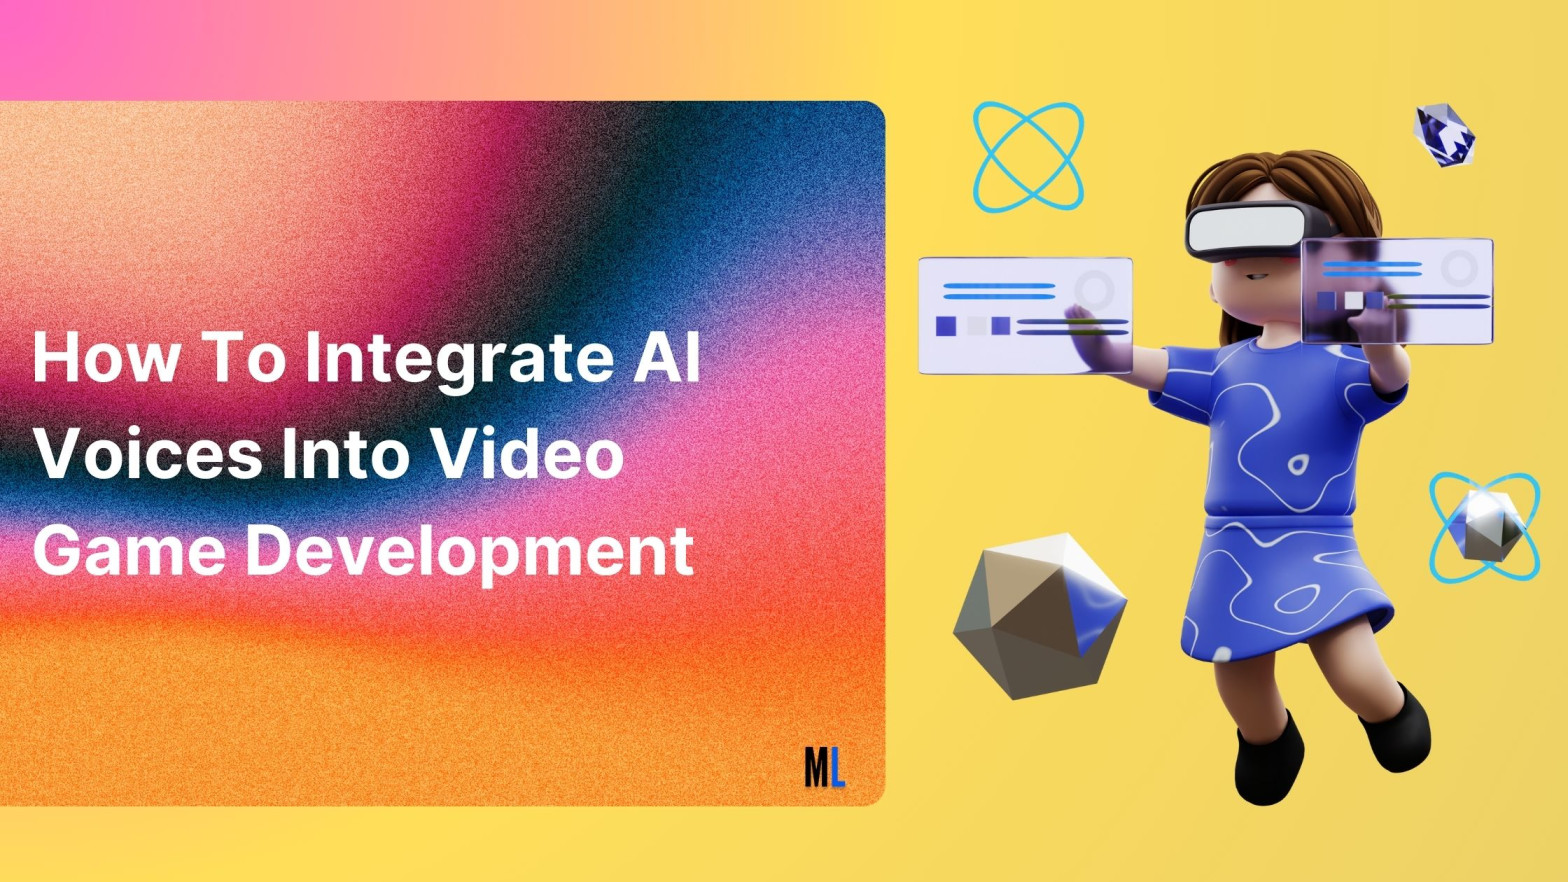 How To Integrate AI Voices Into Video Game Development